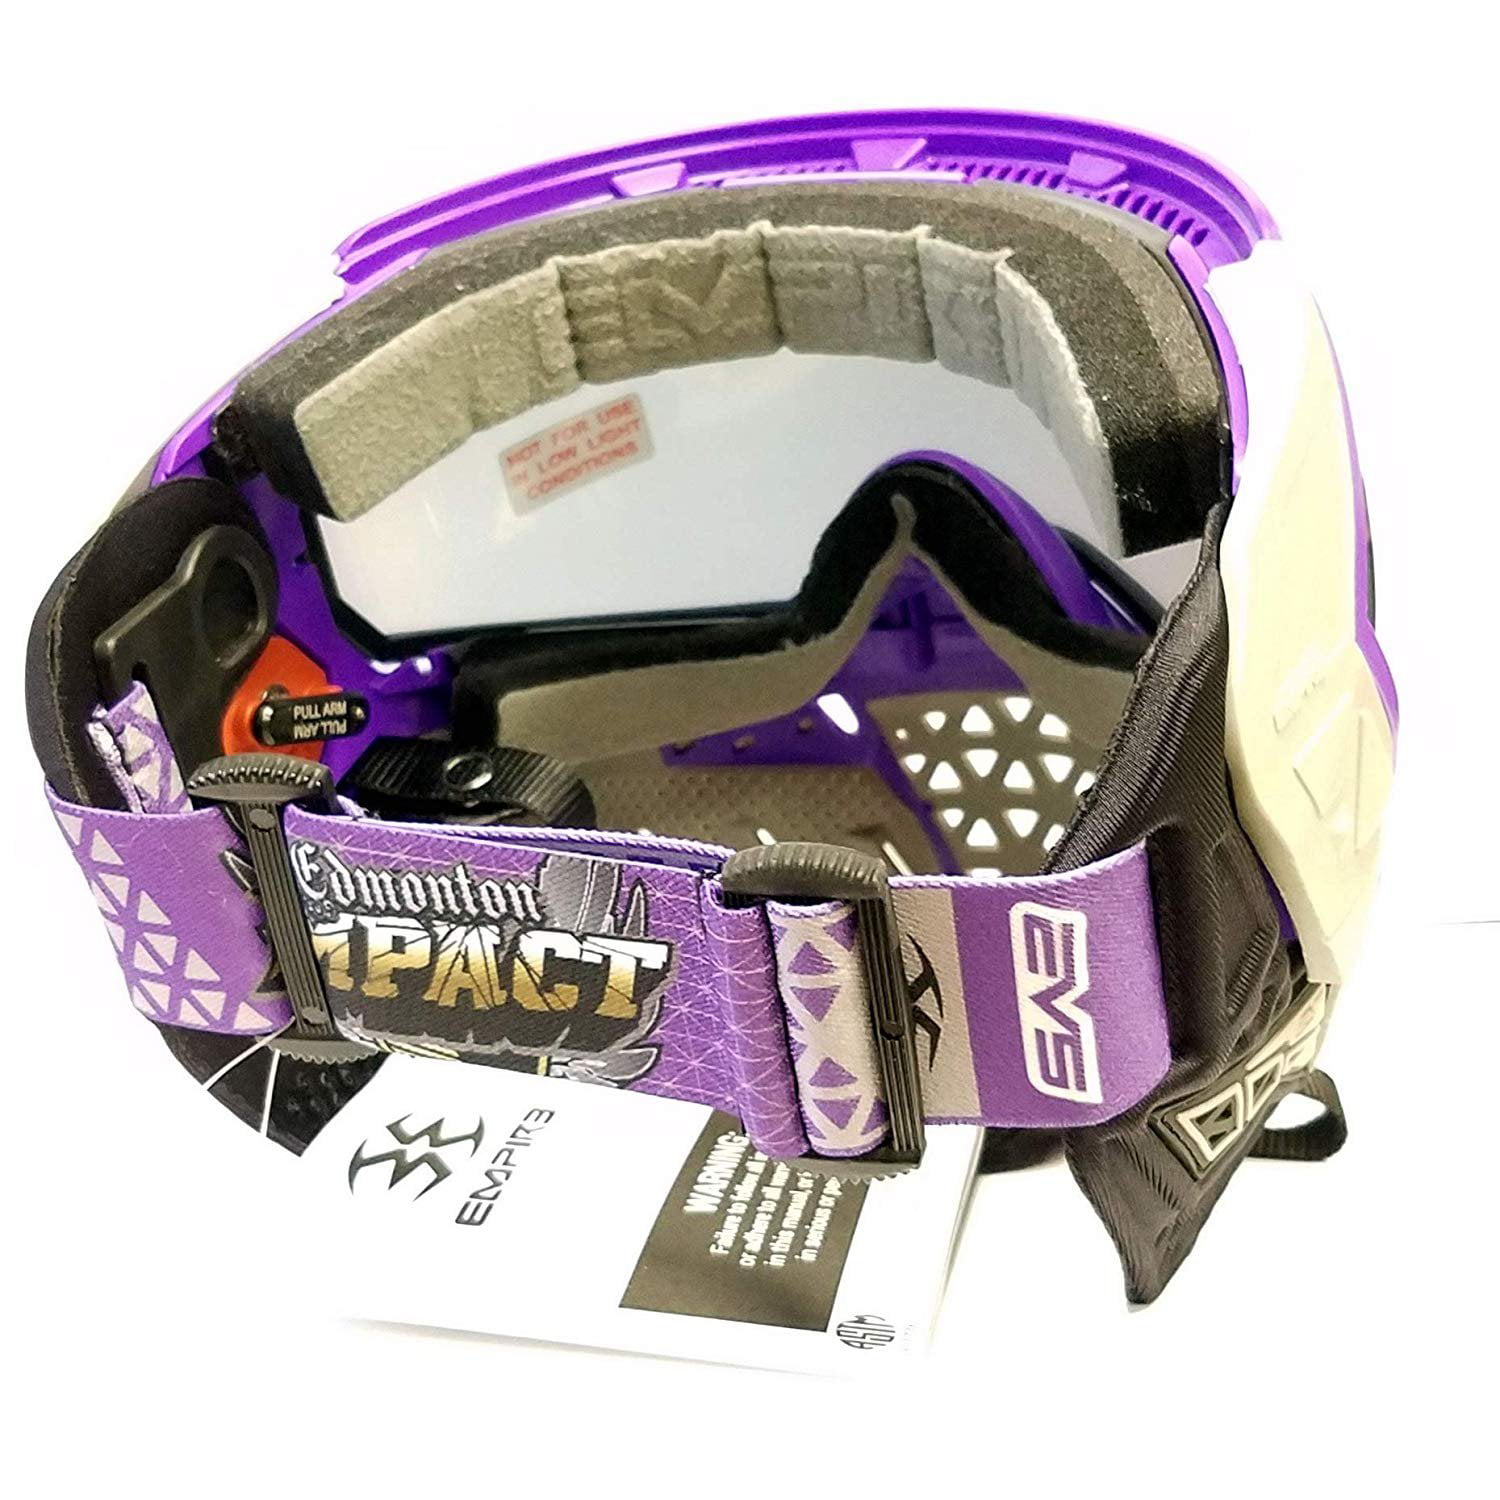 EMPIRE EVS PAINTBALL MASK GOGGLES 2 STRAPS IMPACT GREY PURPLE GOLD LENS 